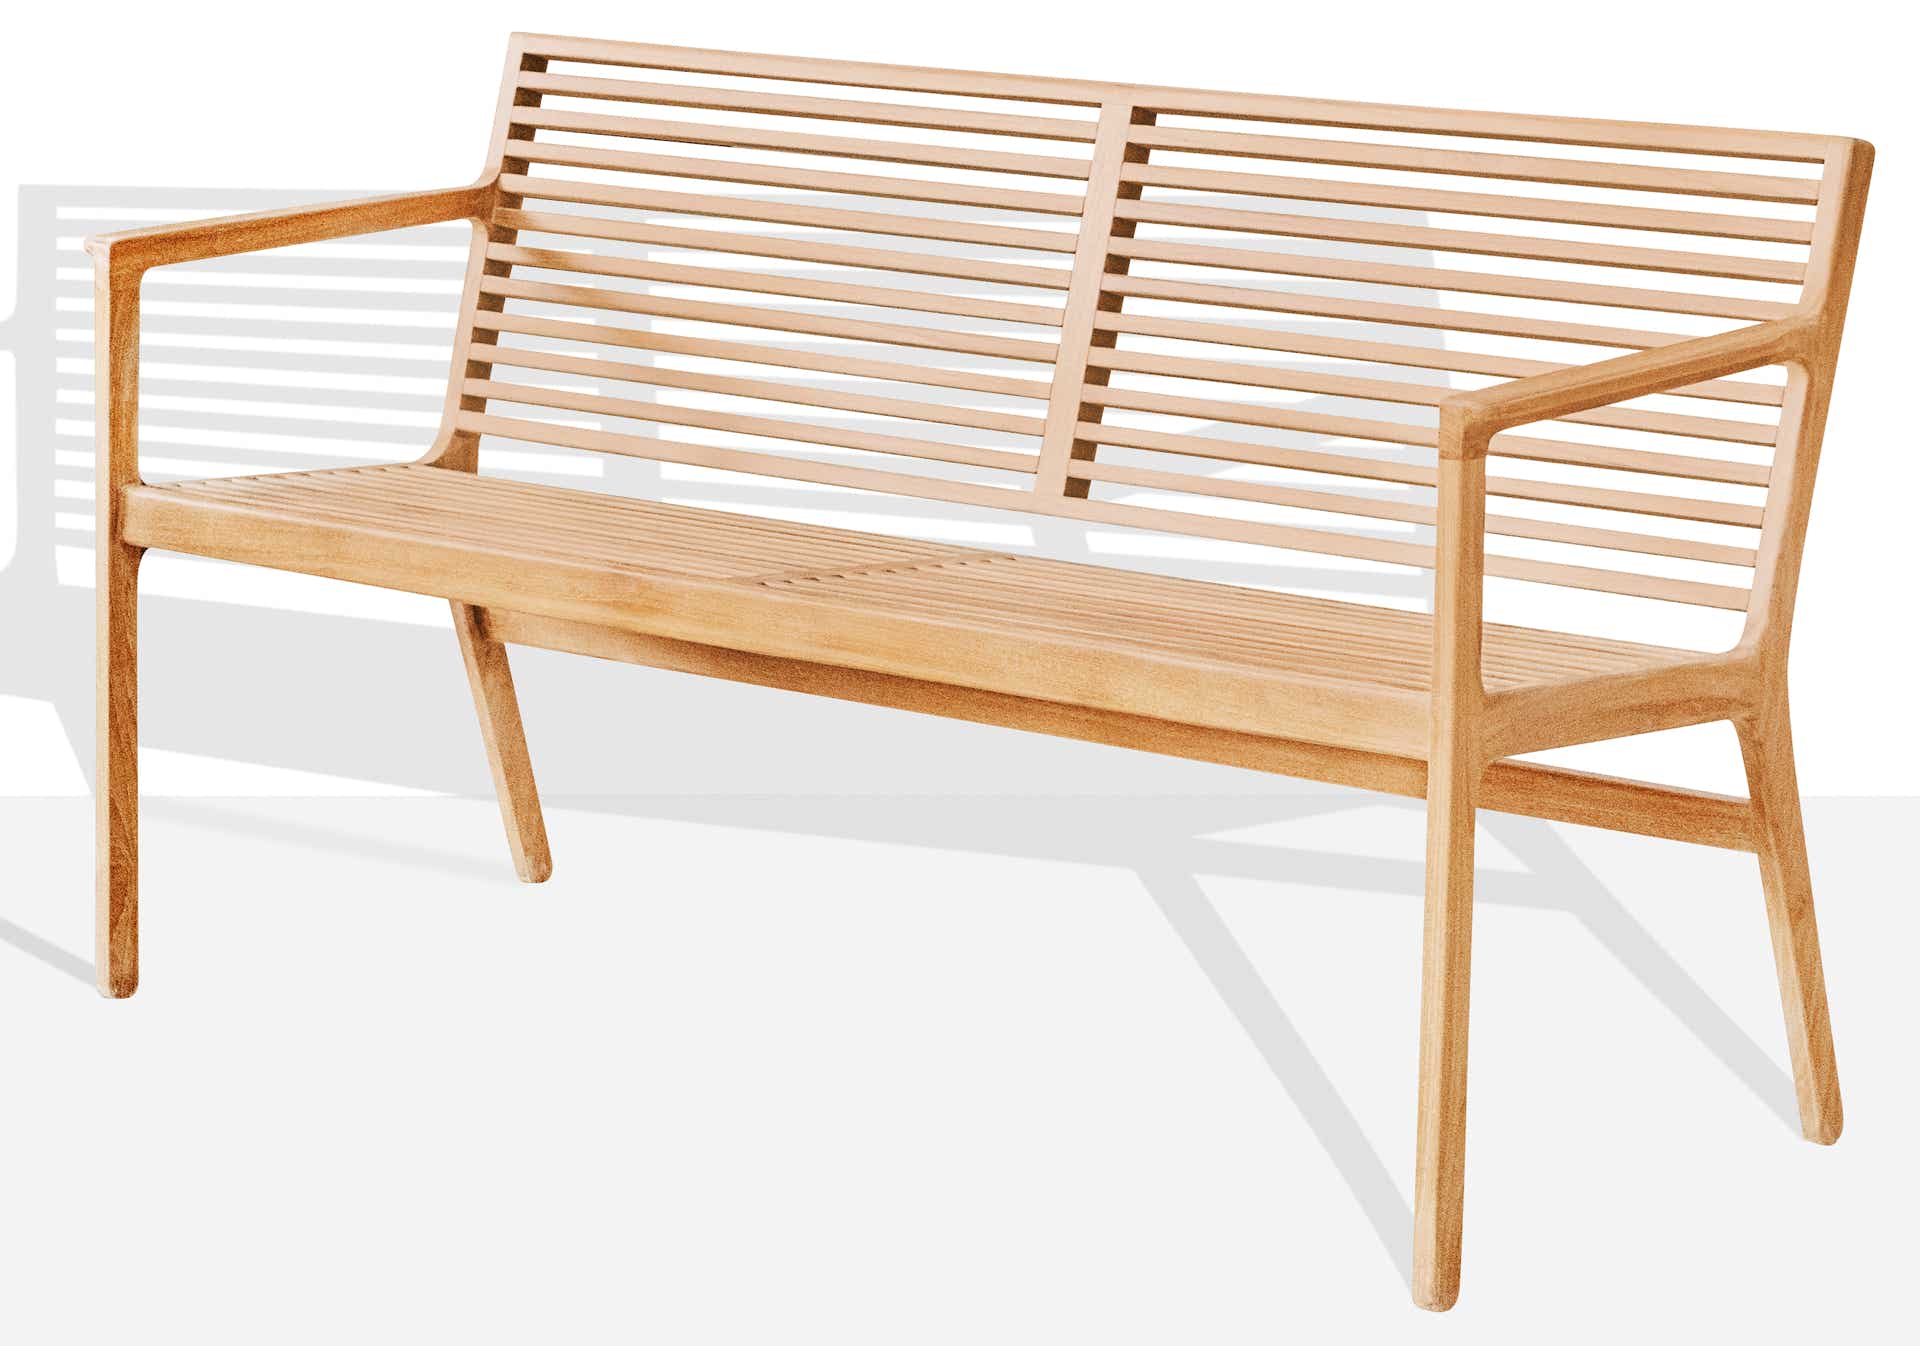 Collection RIB Outdoor - Lounge Morten Anker